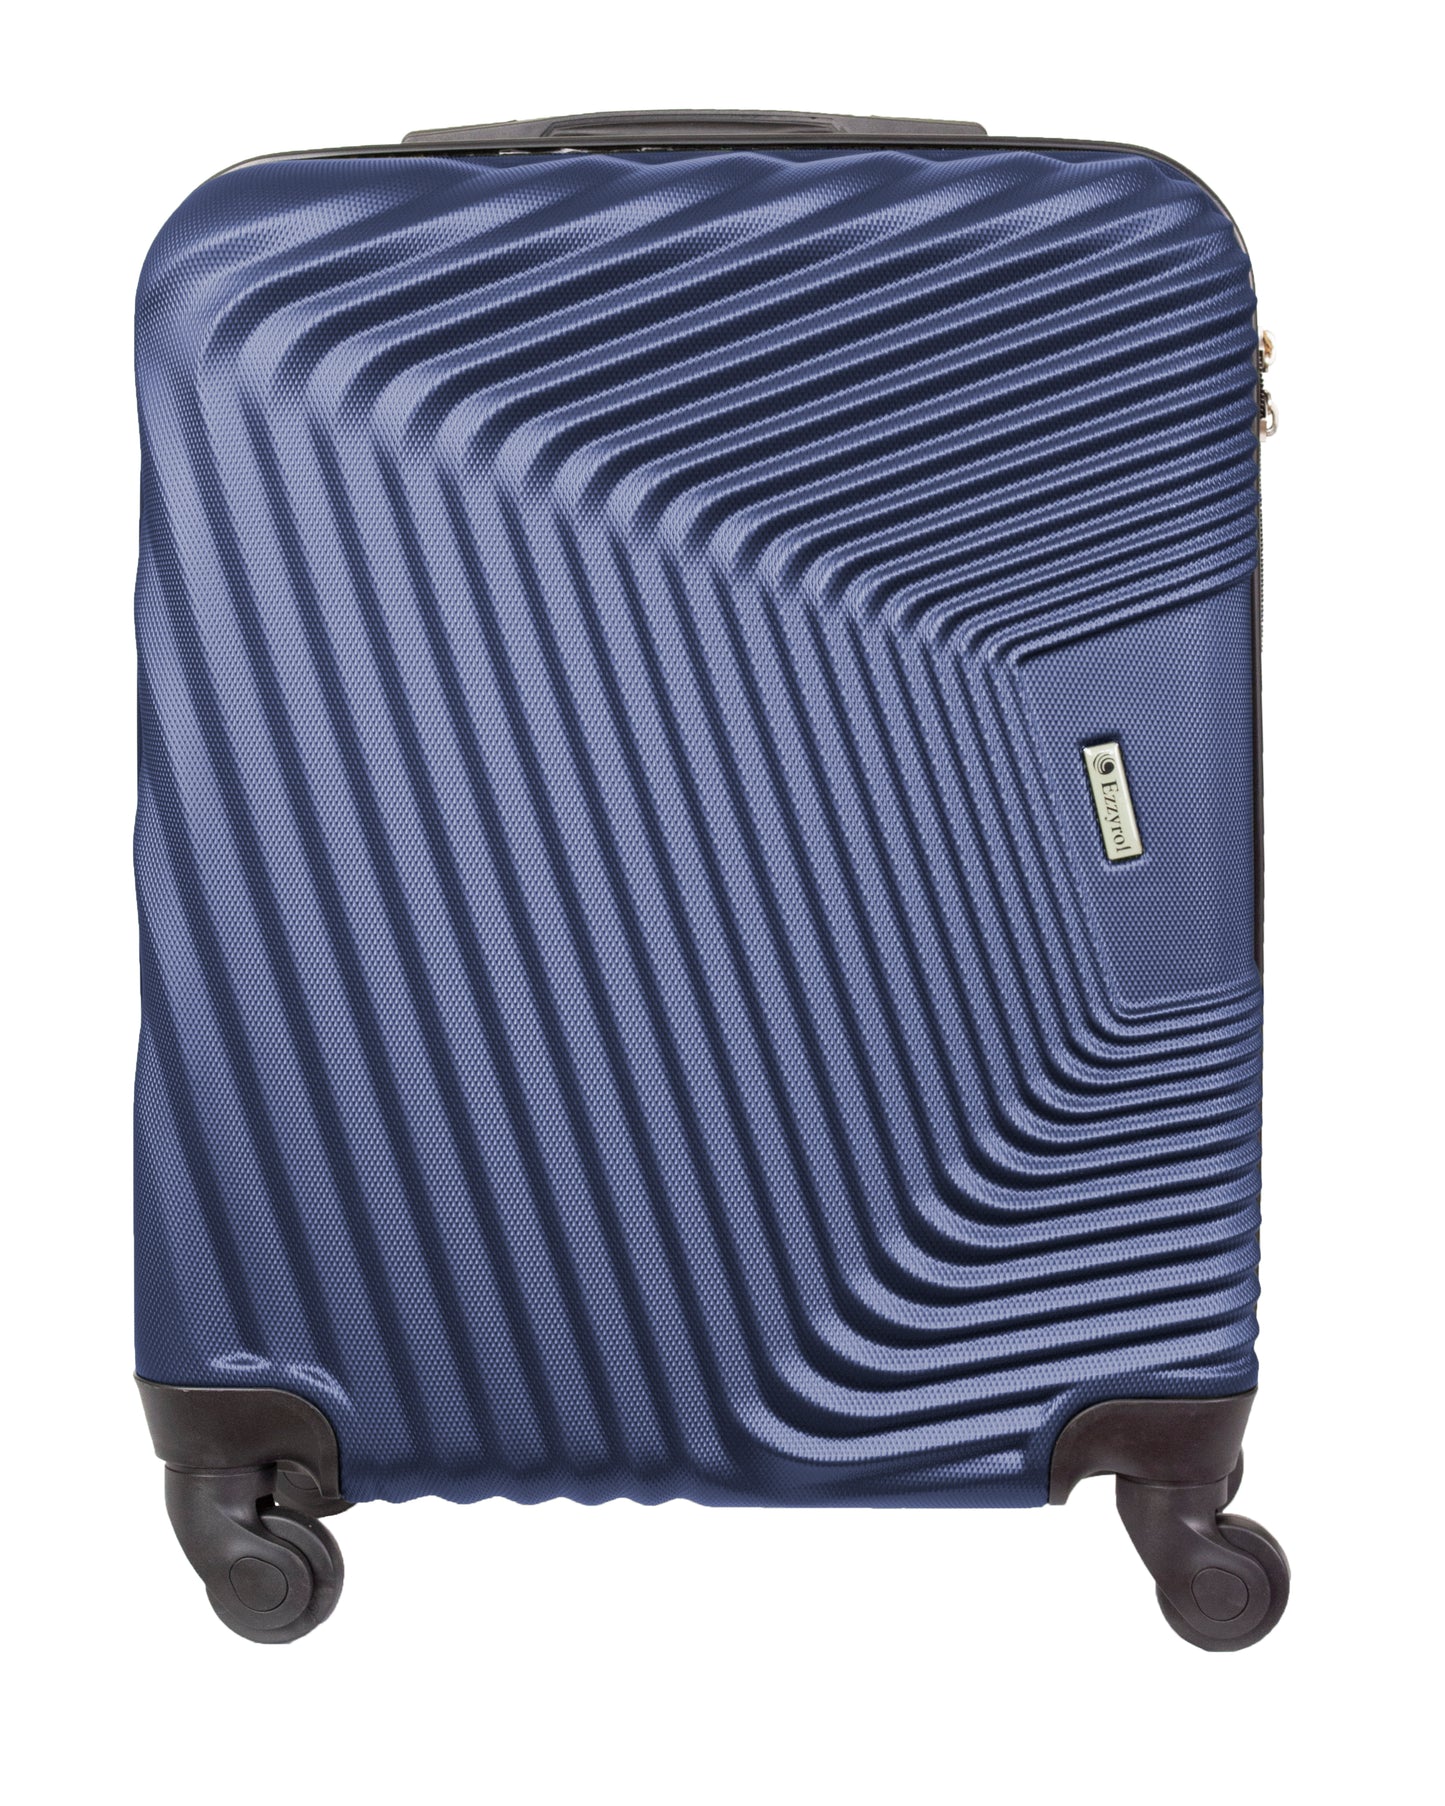 Cabin Size ABS Suitcase Hard Shell Luggage 20"